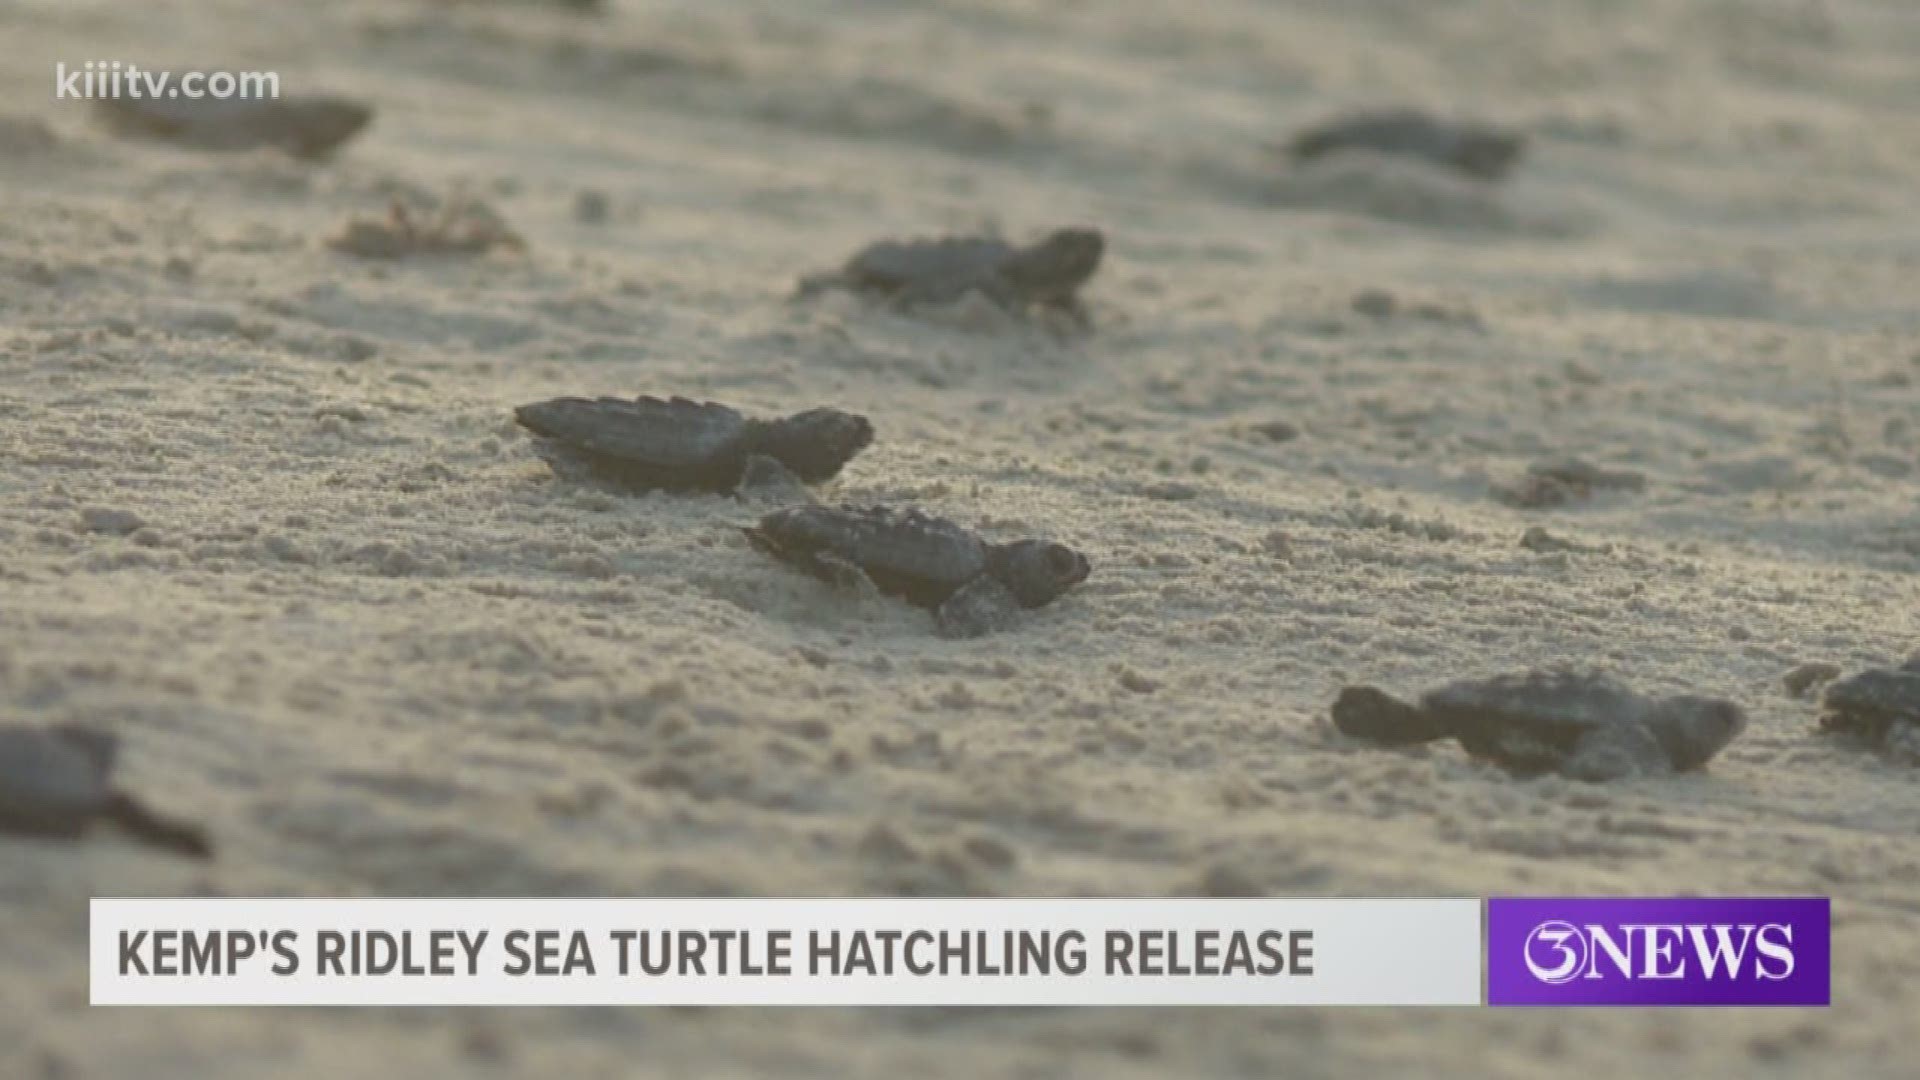 The turtles were released at Padre Island National Seashore